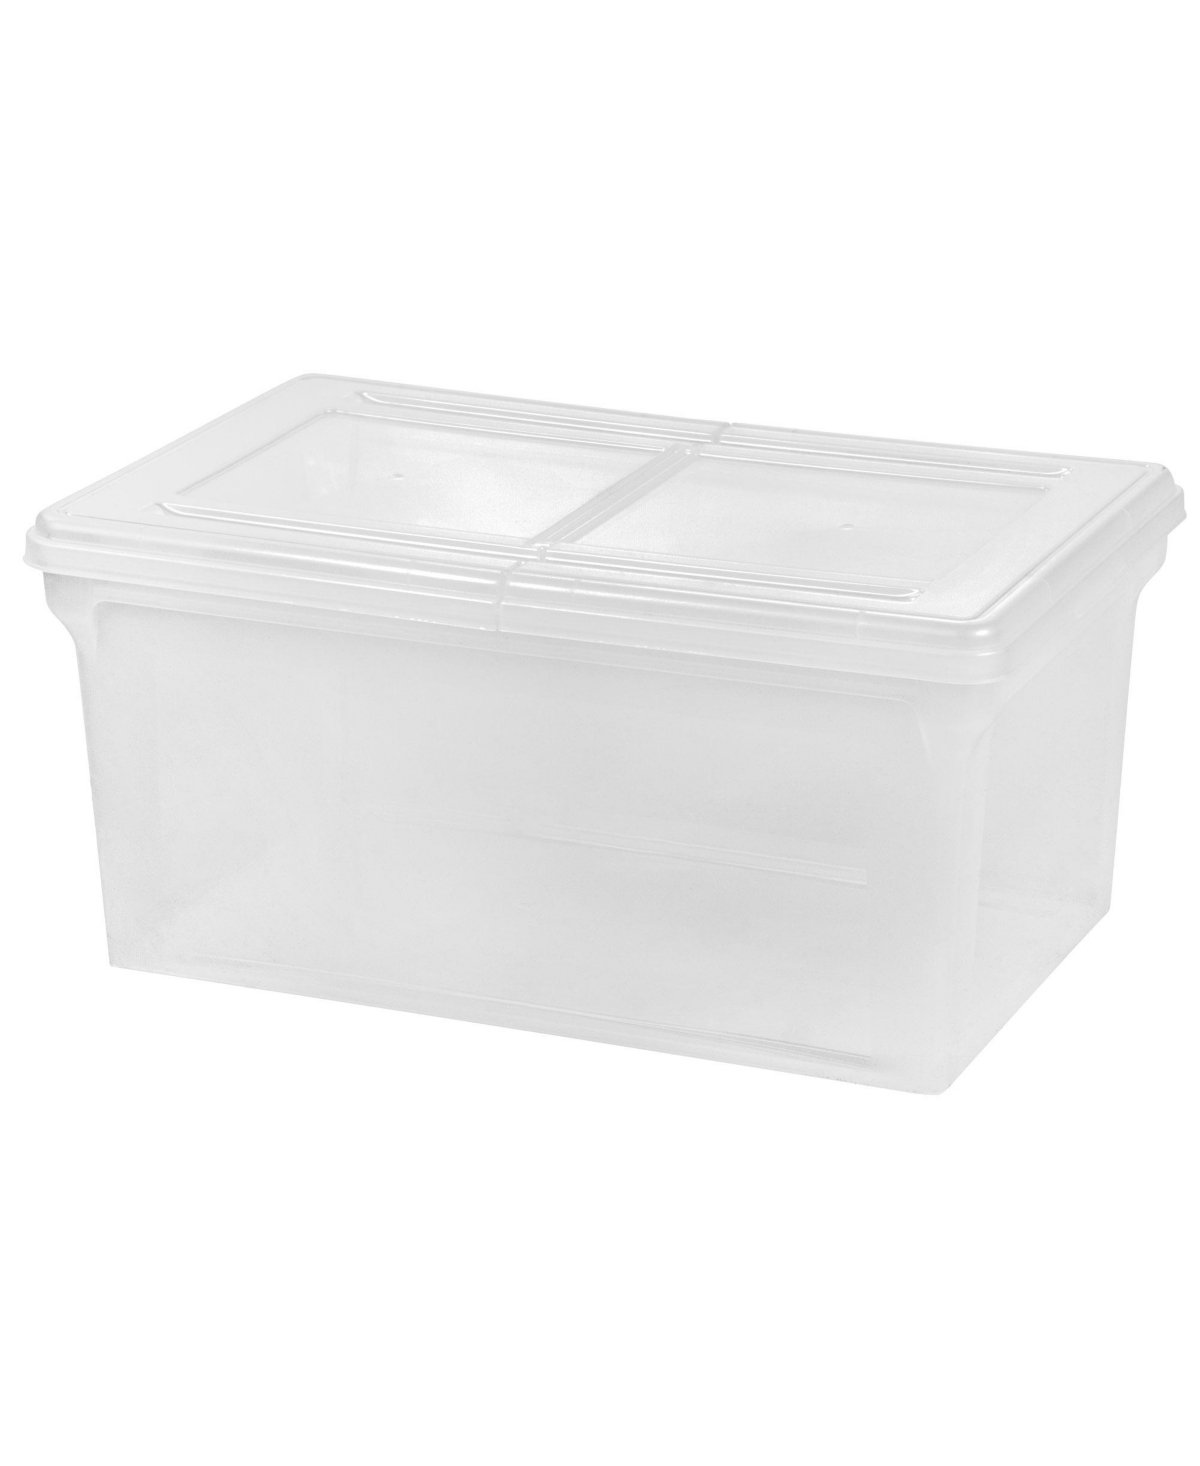 44 Quart Letter/Legal File Tote Box, Bpa-Free Storage Bin Tote Organizer with Durable and Secure Latching Lid, Black/Clear - White